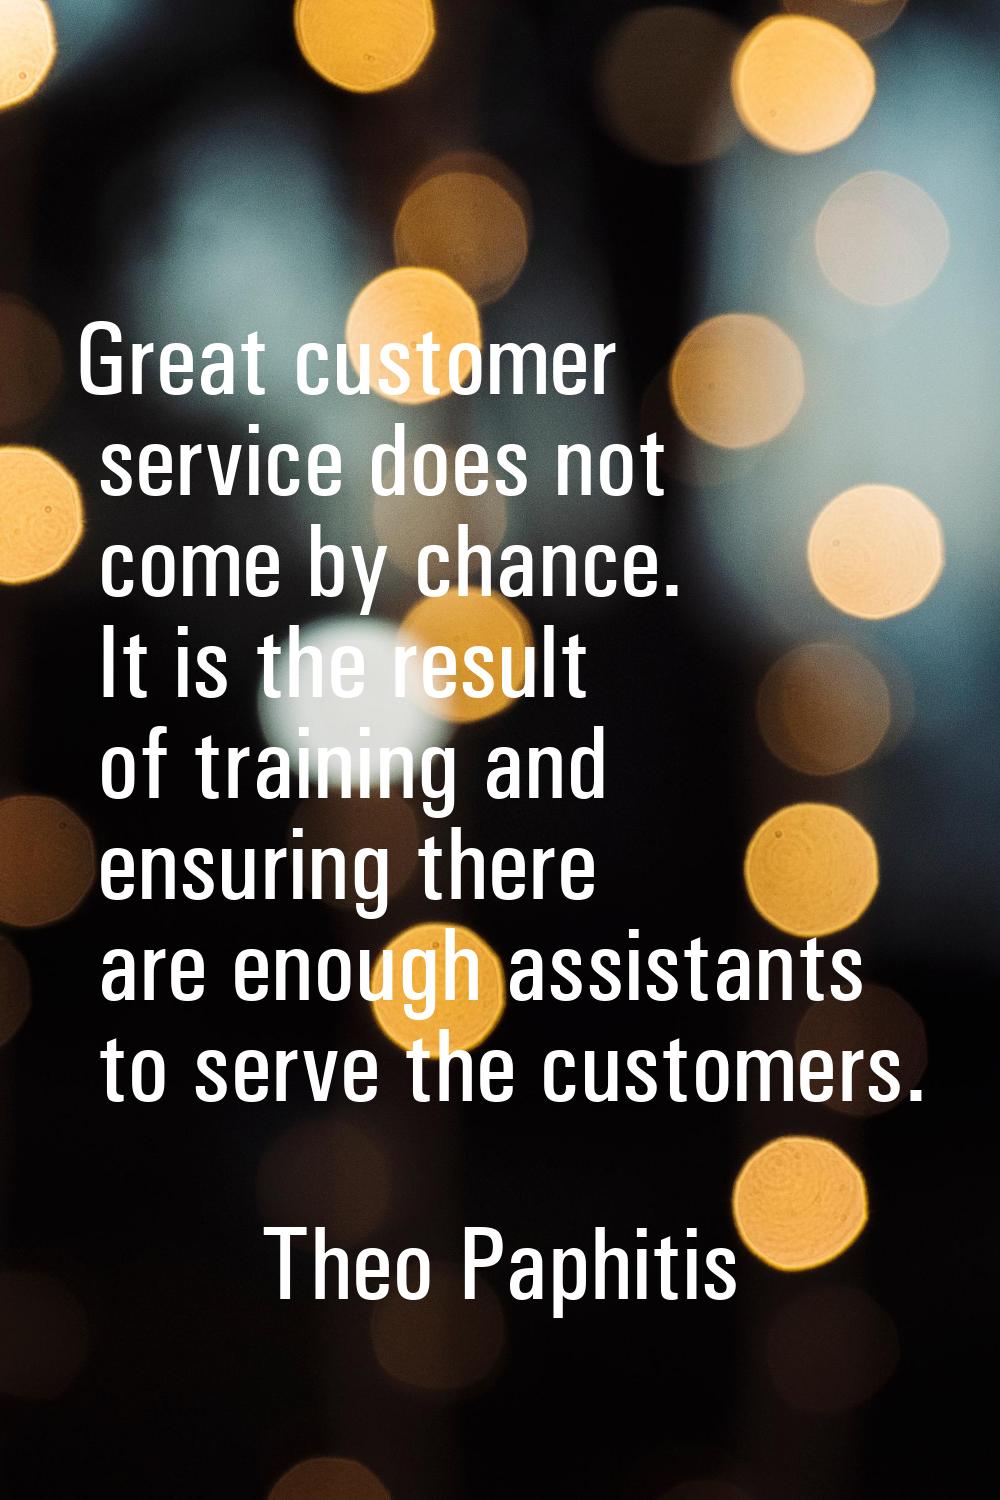 Great customer service does not come by chance. It is the result of training and ensuring there are